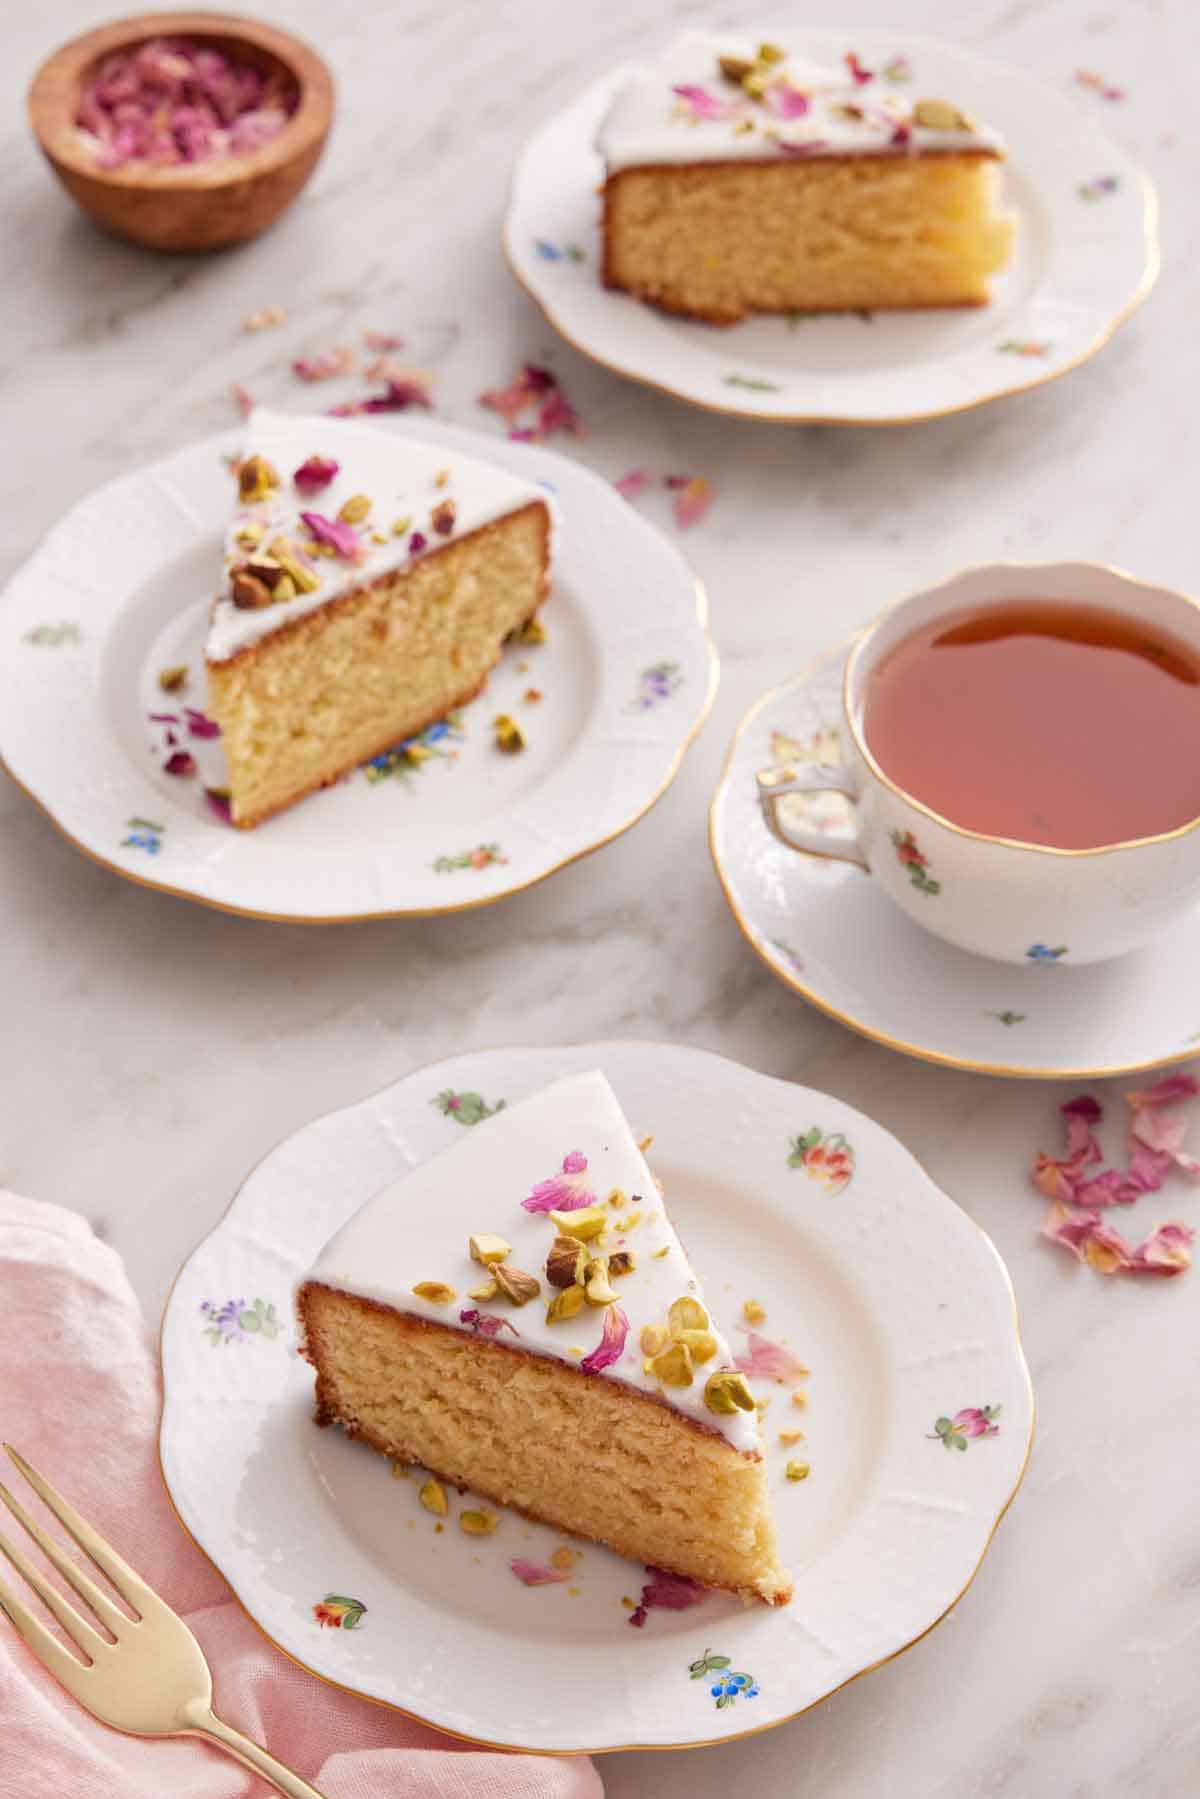 Three plates with sliced Persian love cakes and a cup of tea off to the side with some dried rose petals.